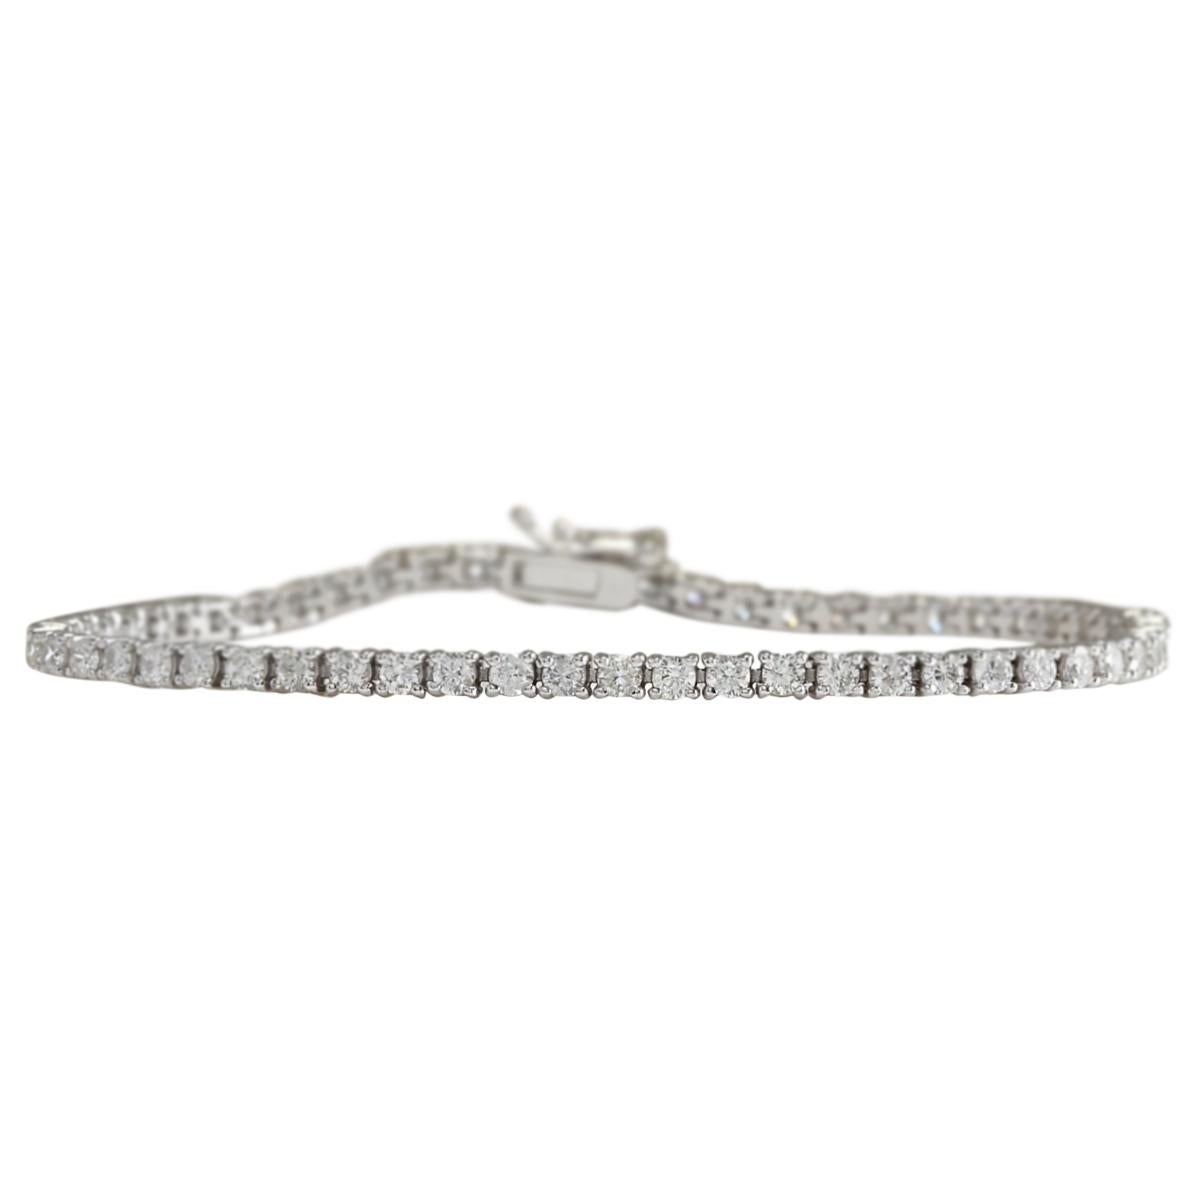 2.55 Carat Natural Diamond Tennis Bracelet In 14 Karat White Gold  In New Condition For Sale In Los Angeles, CA